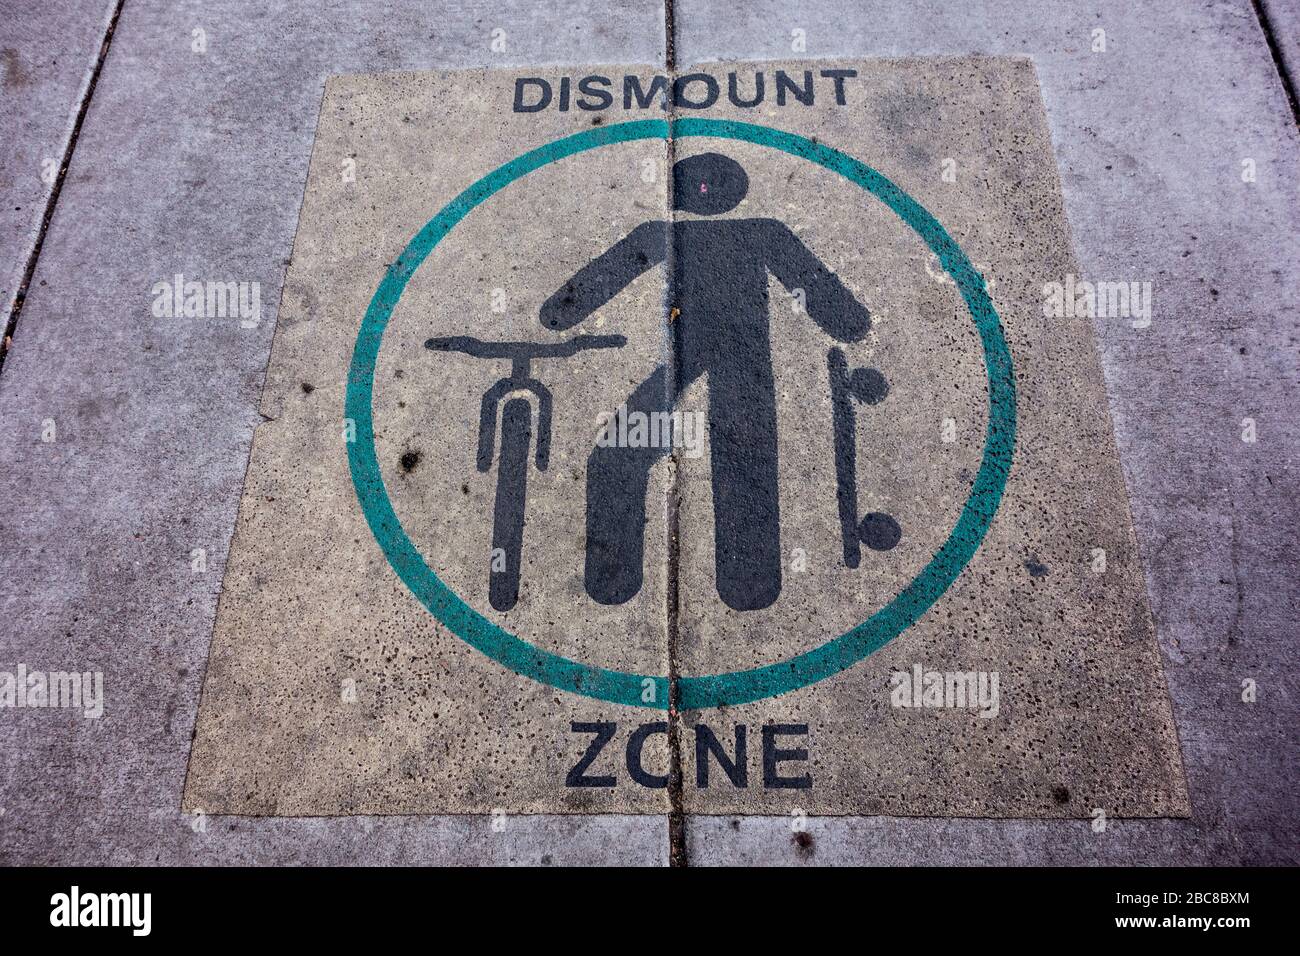 Dismount Zone Sign on the pavement in the Boulder Mall, Boulder, Colorado, USA Stock Photo